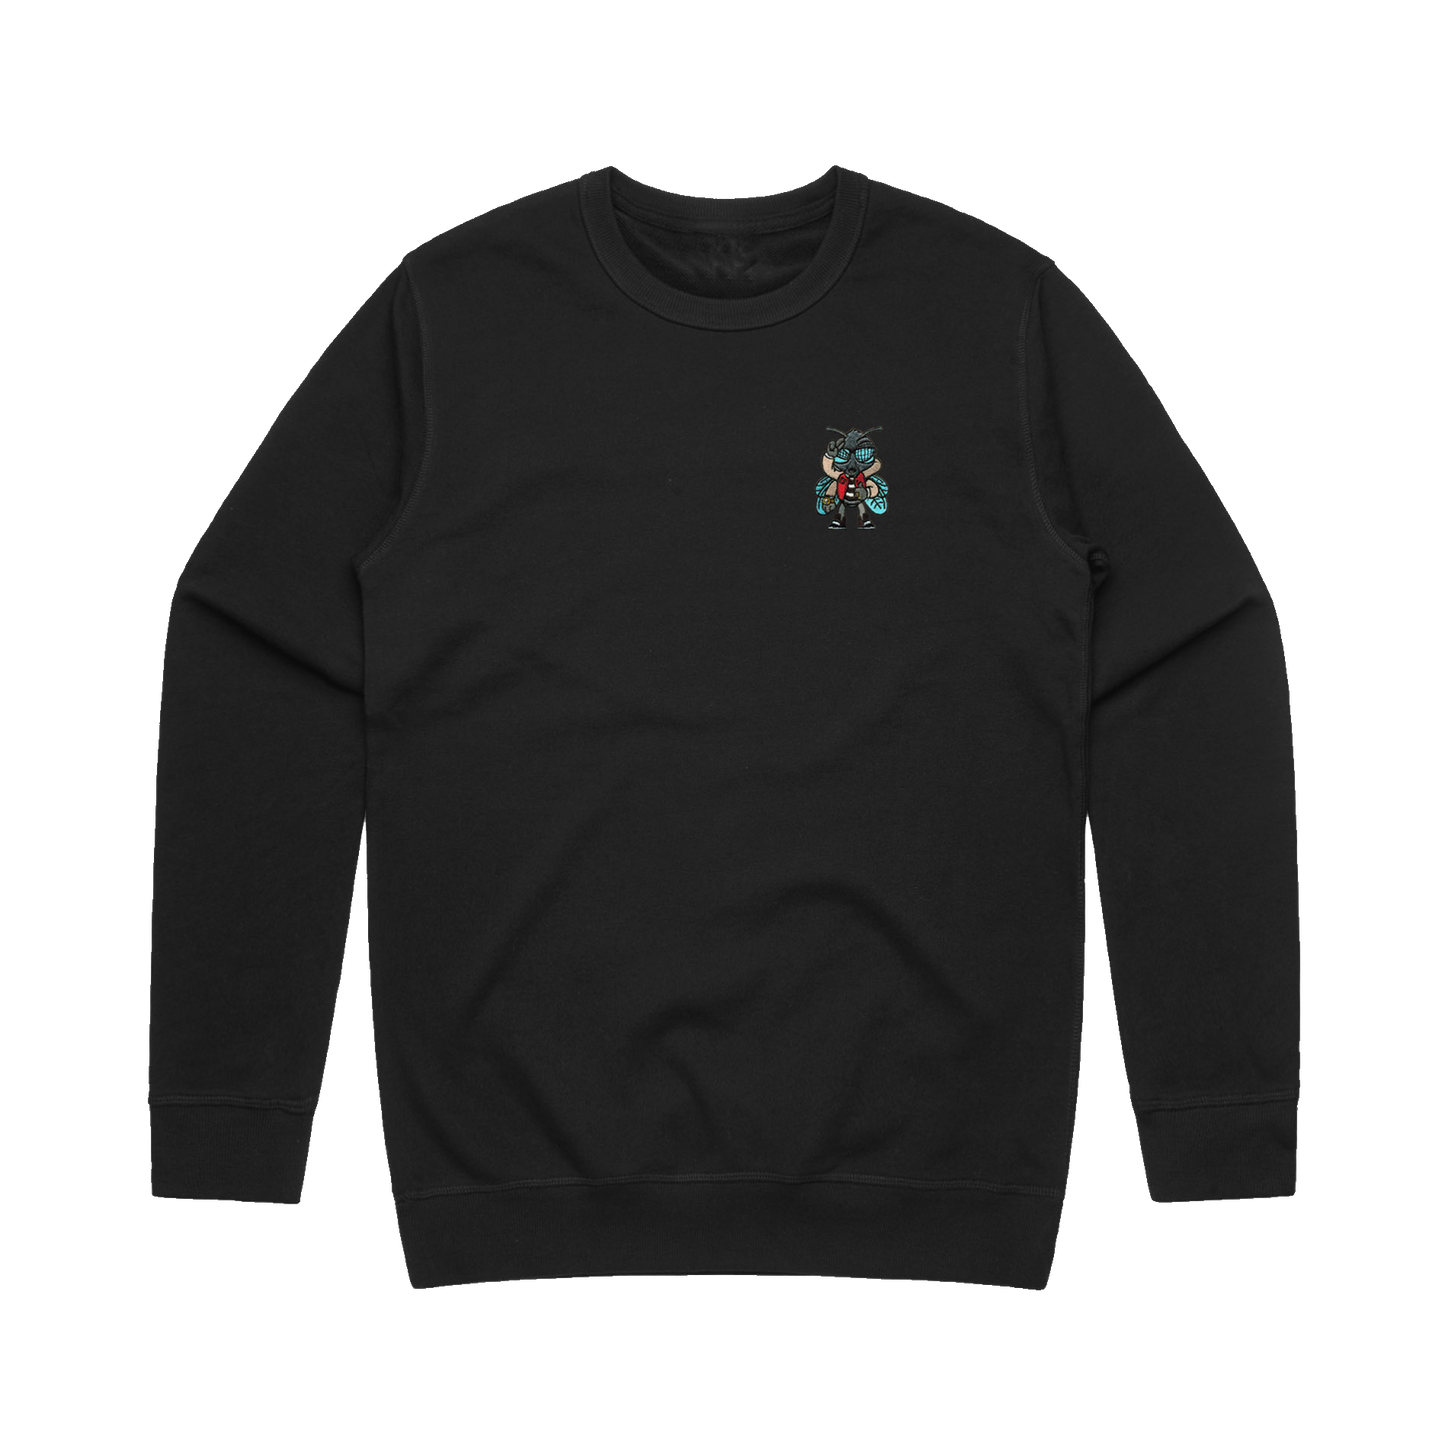 Fly Guy Embroidered Patch Unisex Sweatshirt - Black